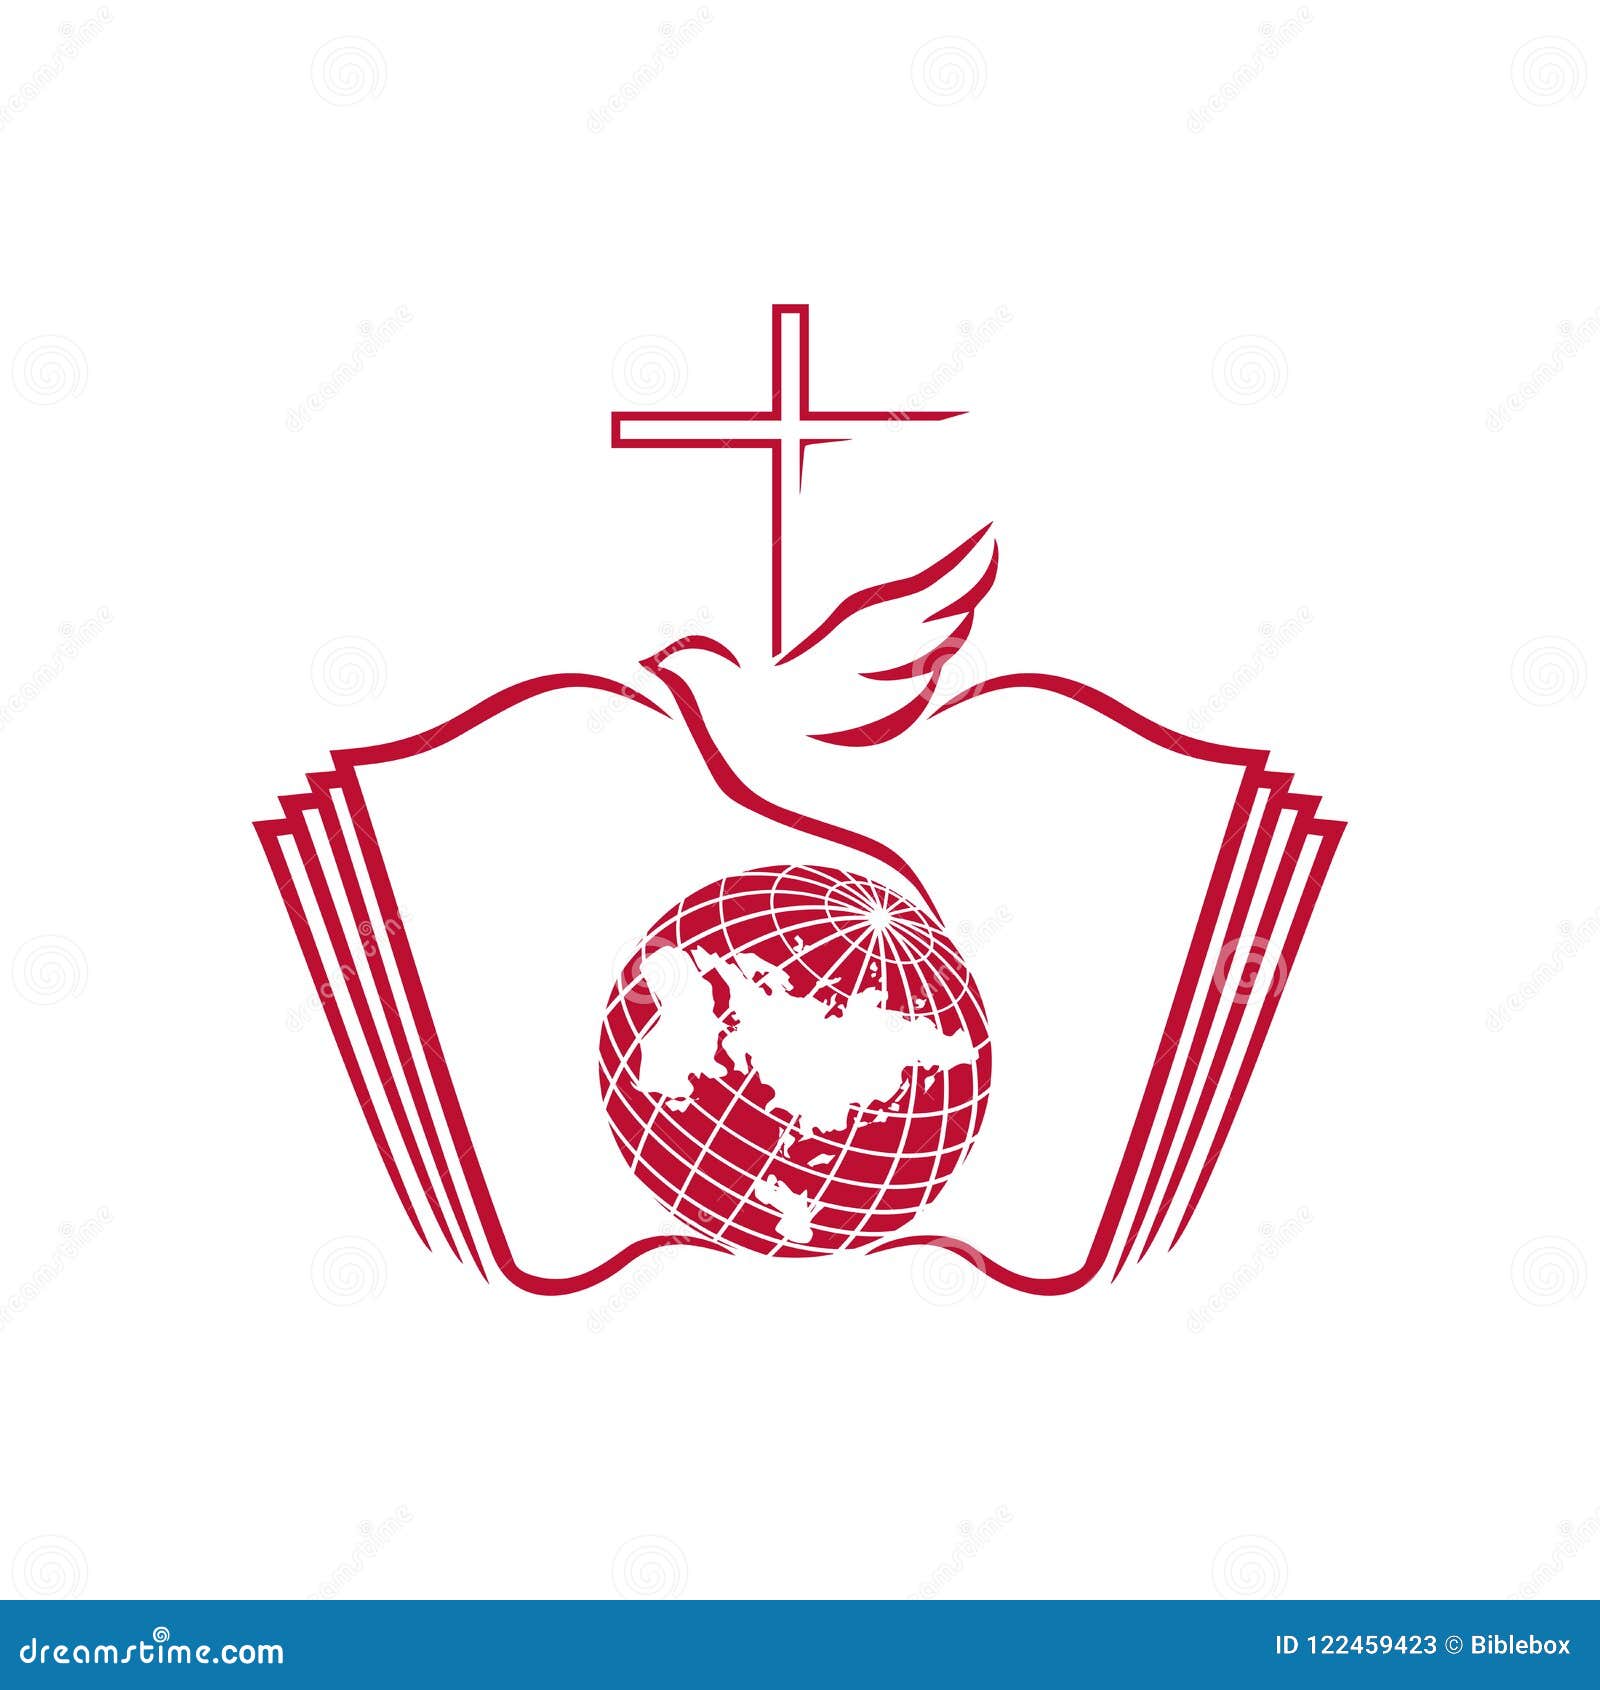 Logo Of The Church And Ministry The Open Bible The Cross Of